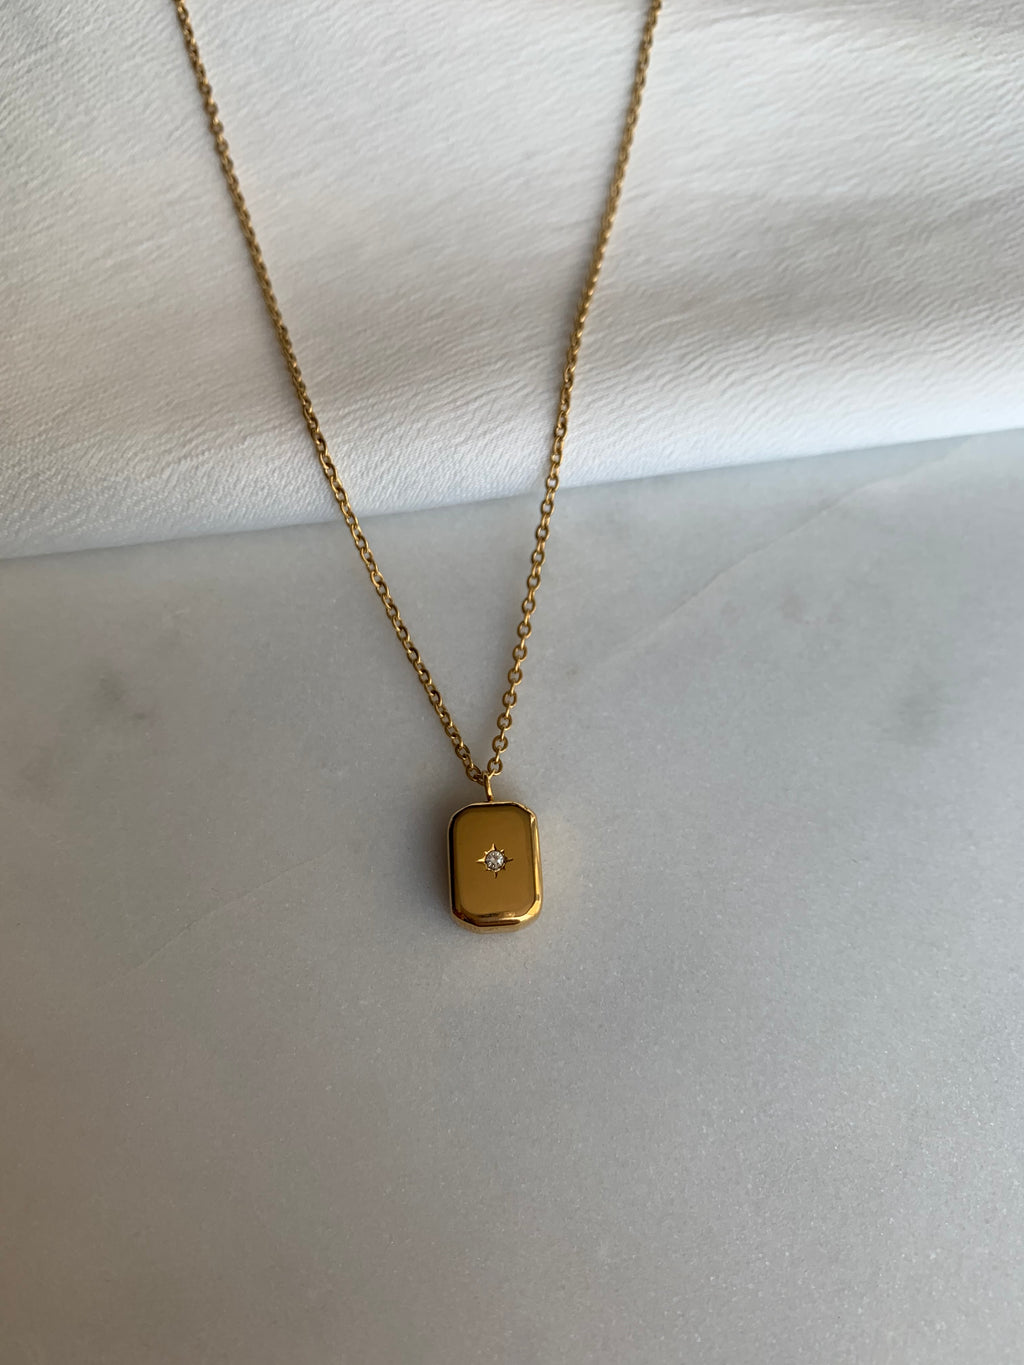 Chic necklace with small rectangle pendant & cz centre stone. Stack with any base chain necklace! 14 Karat Gold Plated Hypoallergenic Tarnish Resistant 45cm length, adjustable | Droplet Necklace | Handmade Jewelry EasyClubCo